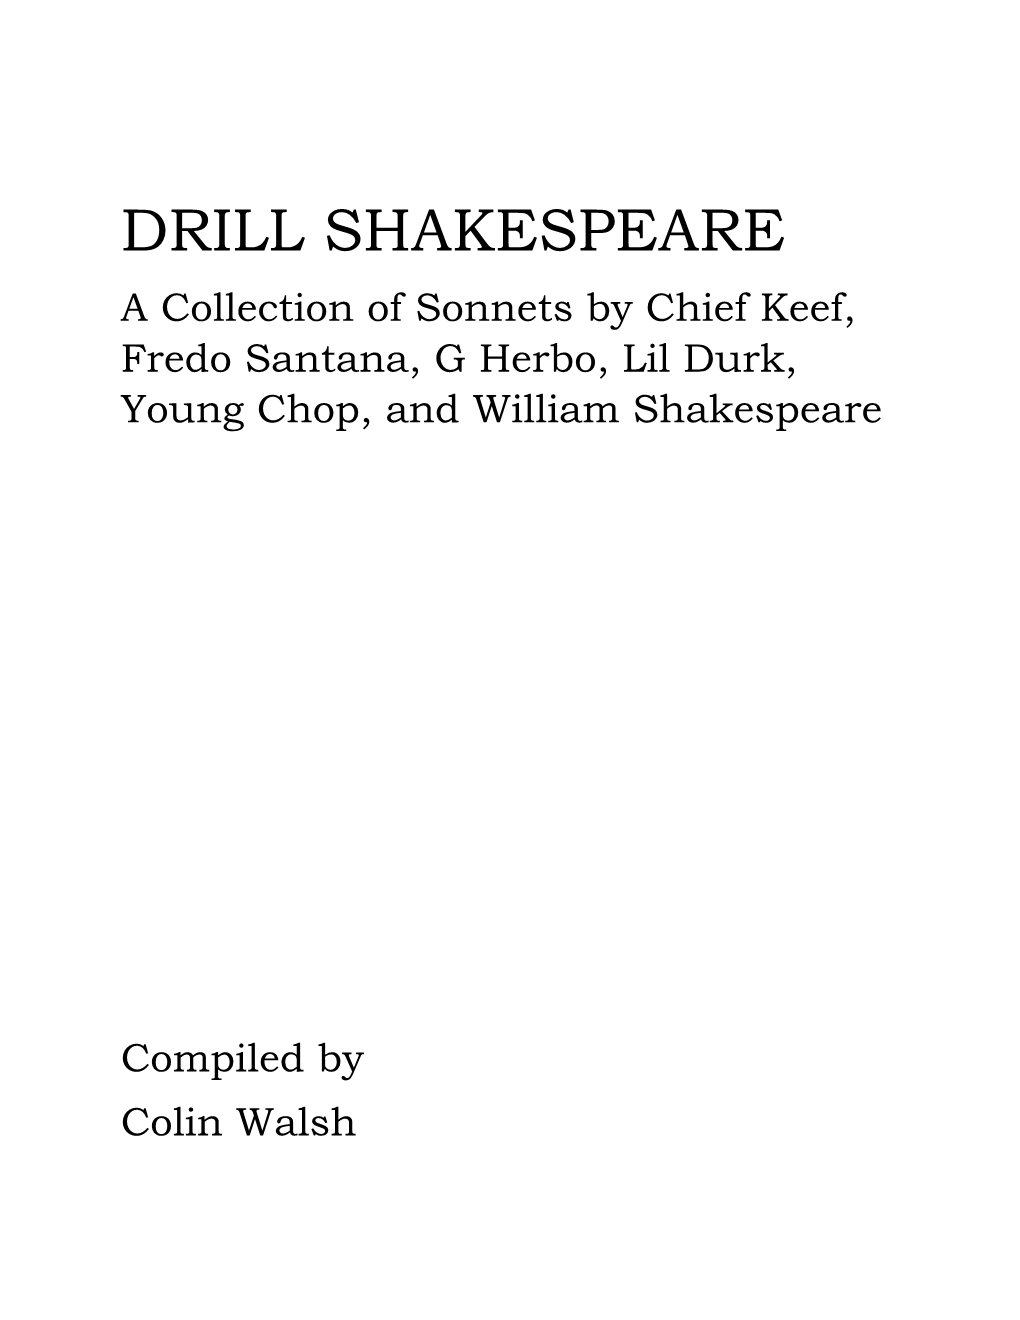 DRILL SHAKESPEARE a Collection of Sonnets by Chief Keef, Fredo Santana, G Herbo, Lil Durk, Young Chop, and William Shakespeare